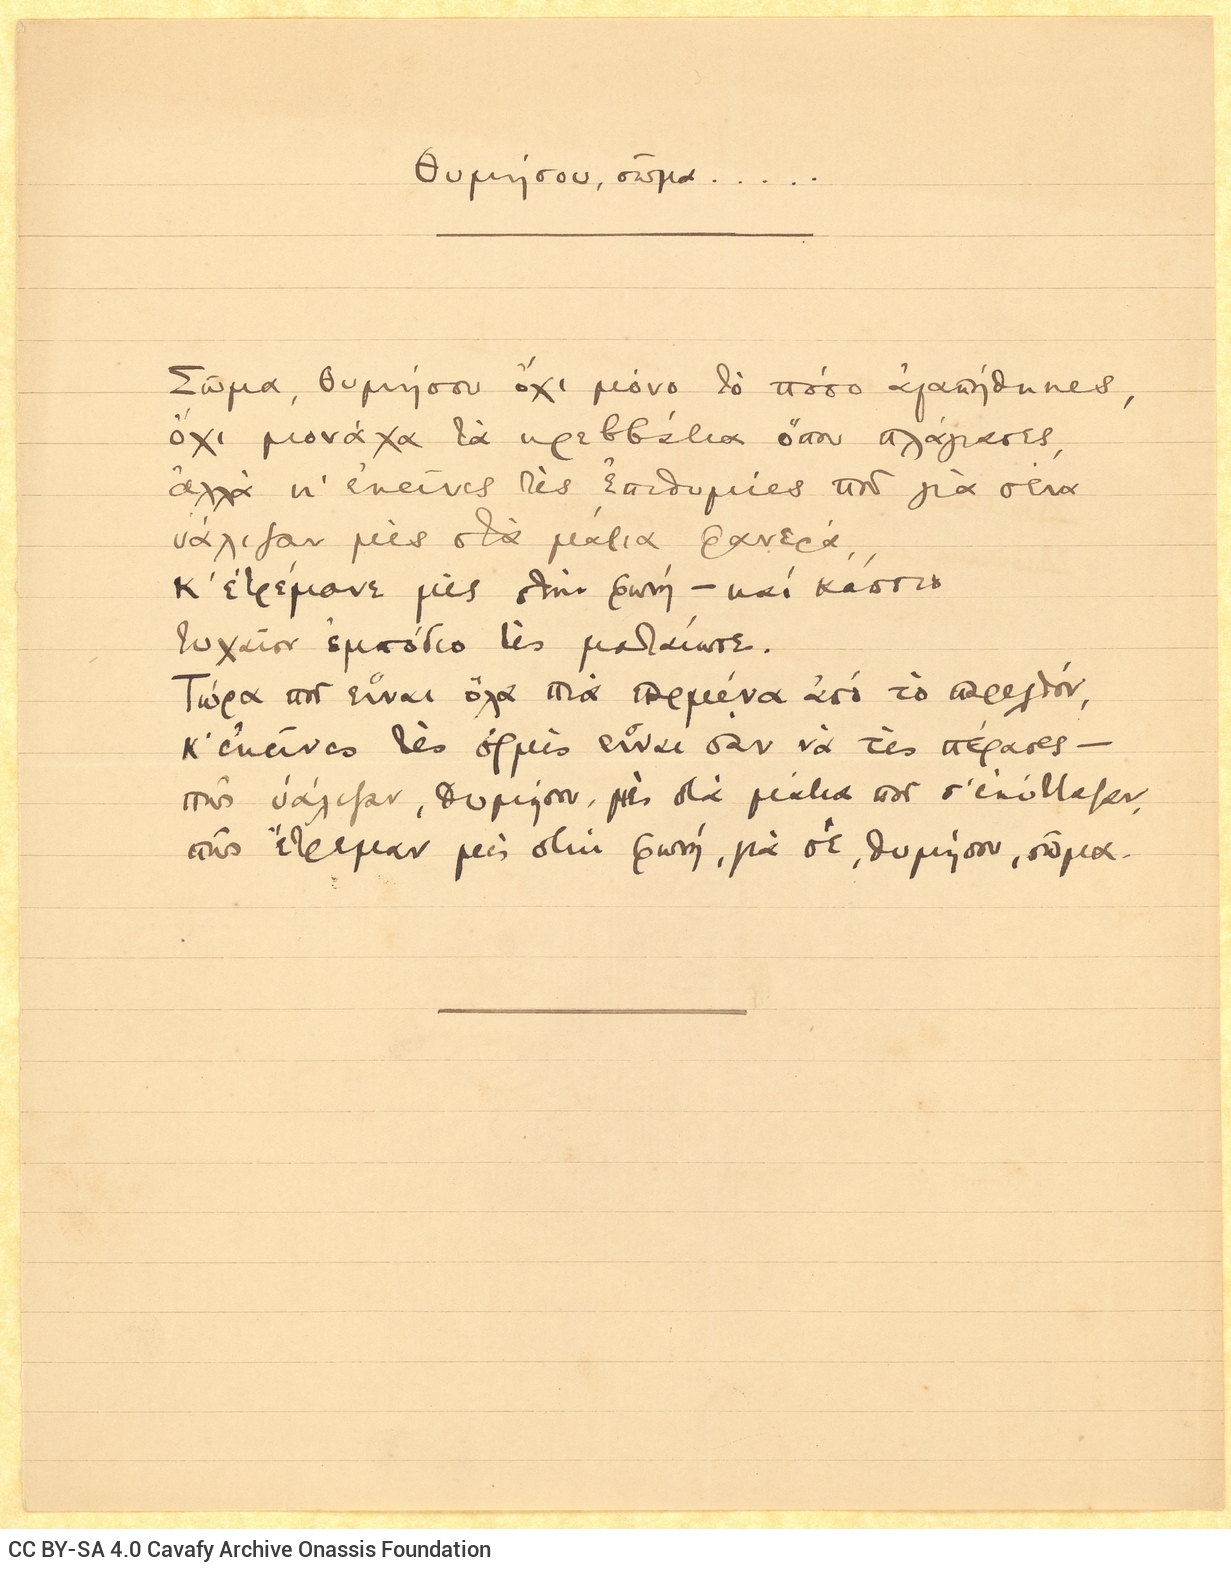 Manuscript of the poem "Remember, Body....." on one side of a ruled sheet. Blank verso.